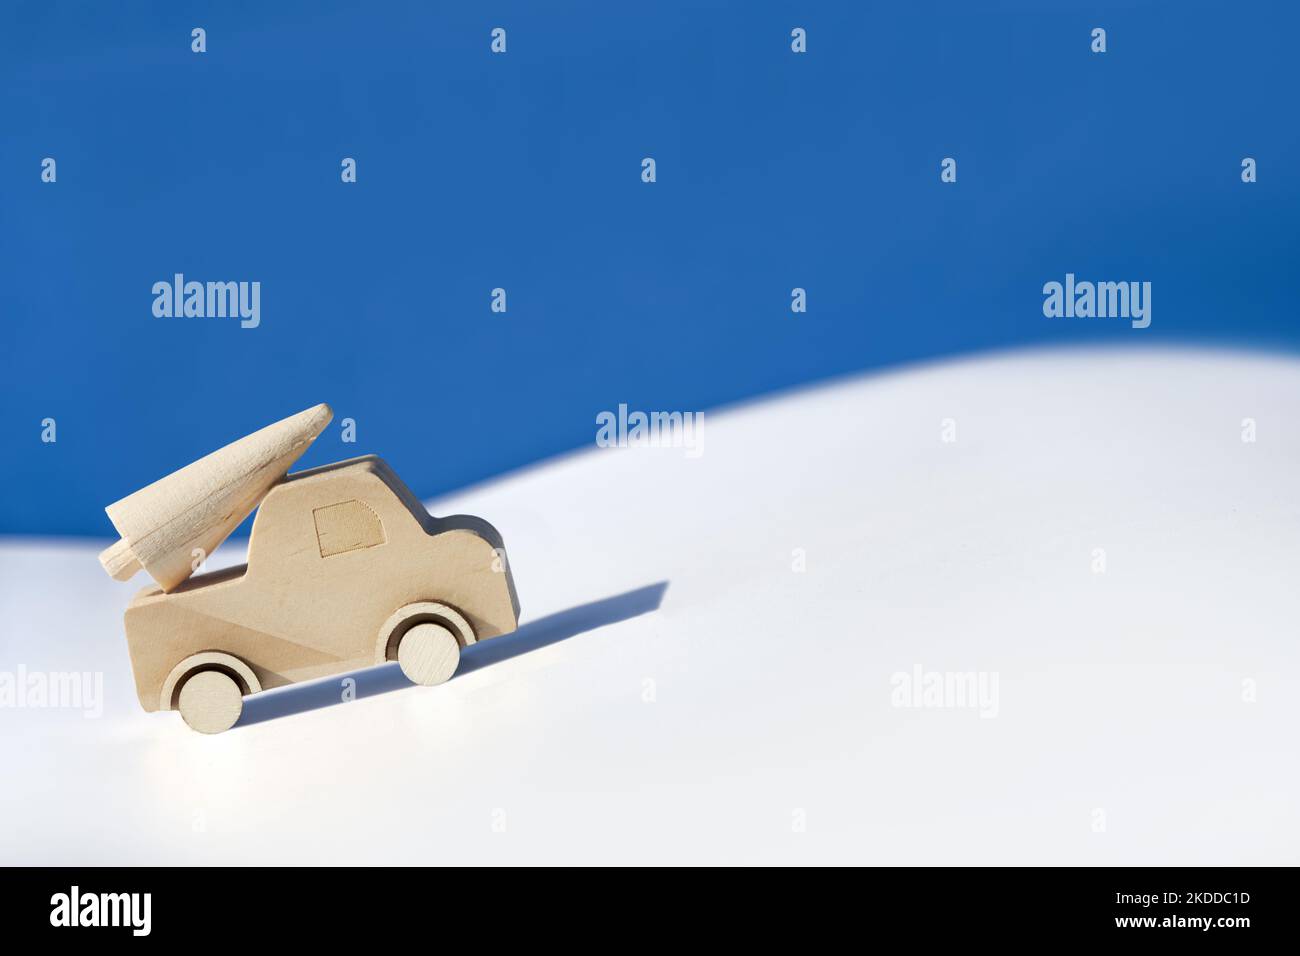 Wooden toy, silhouette of Christmas tree on toy car on colored layered paper background. Xmas holiday blue celebration background. Copy-space, place Stock Photo